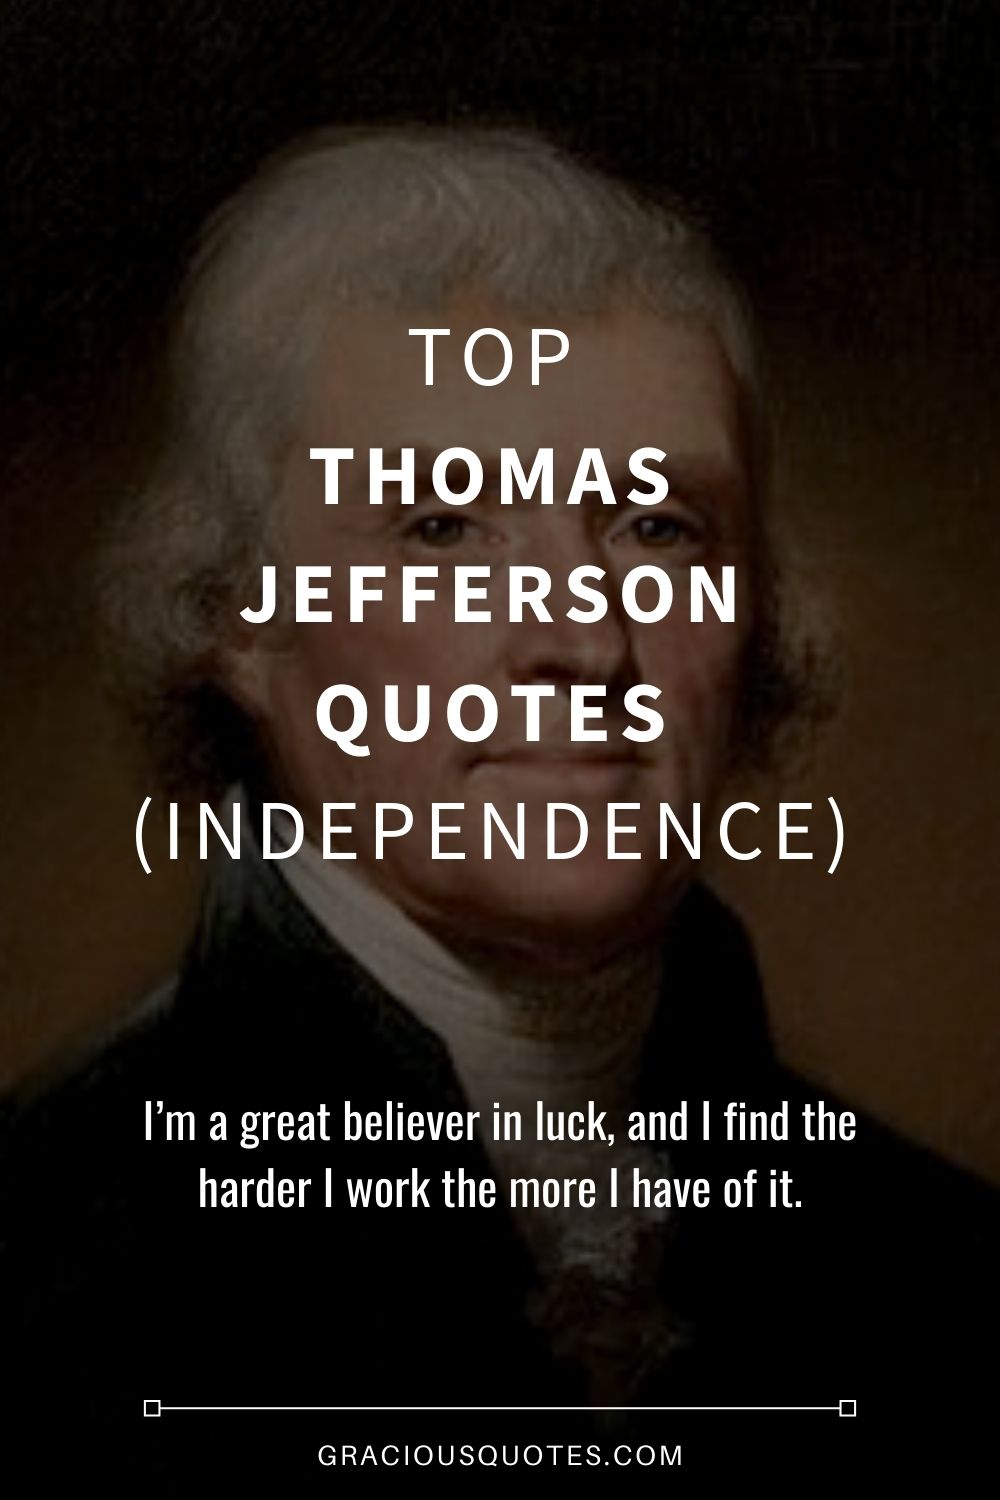 Top Thomas Jefferson Quotes (INDEPENDENCE) - Gracious Quotes